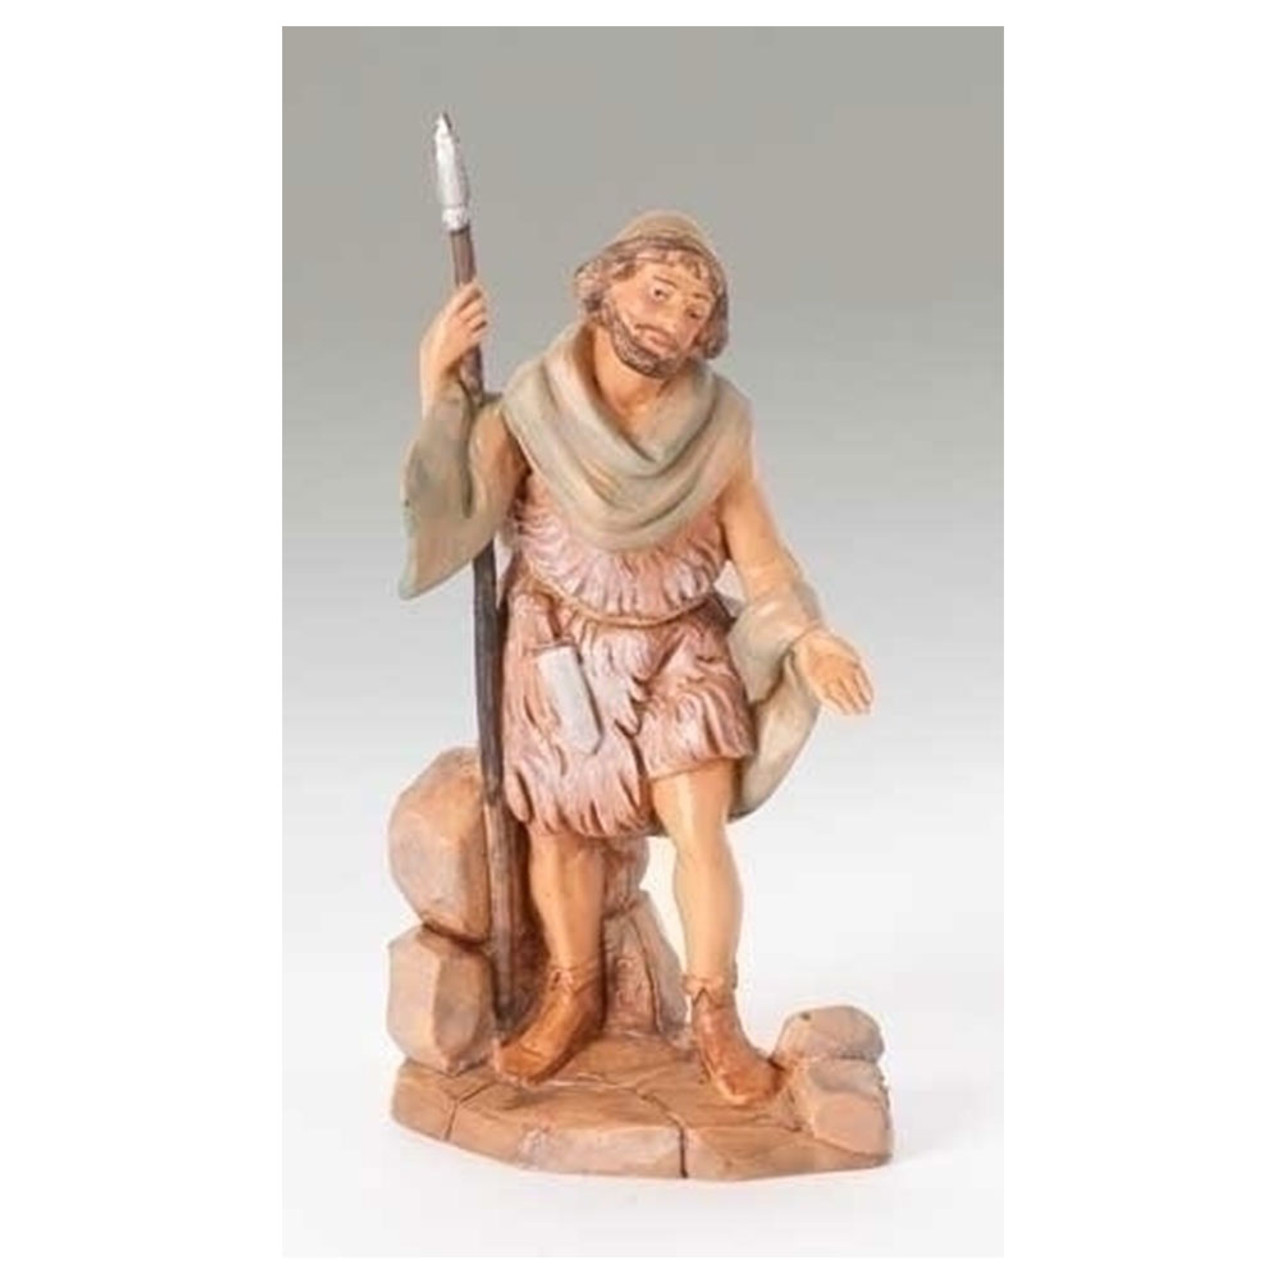 5" scale Fontanini Teman the Hunter with story card